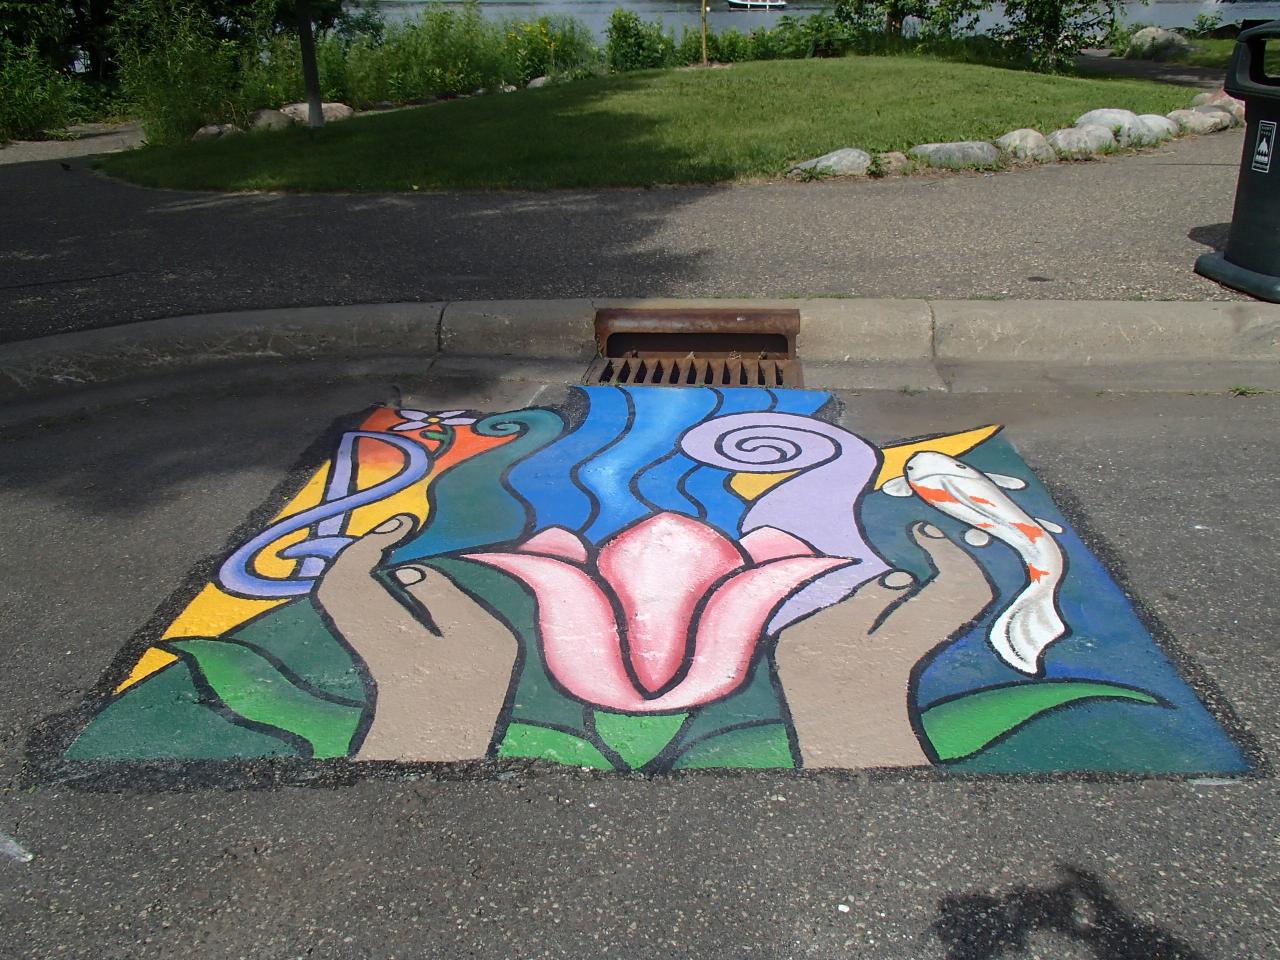 Storm drain mural contains music and fish to connect it to como park and hands representing our responsibliity to care for the lake